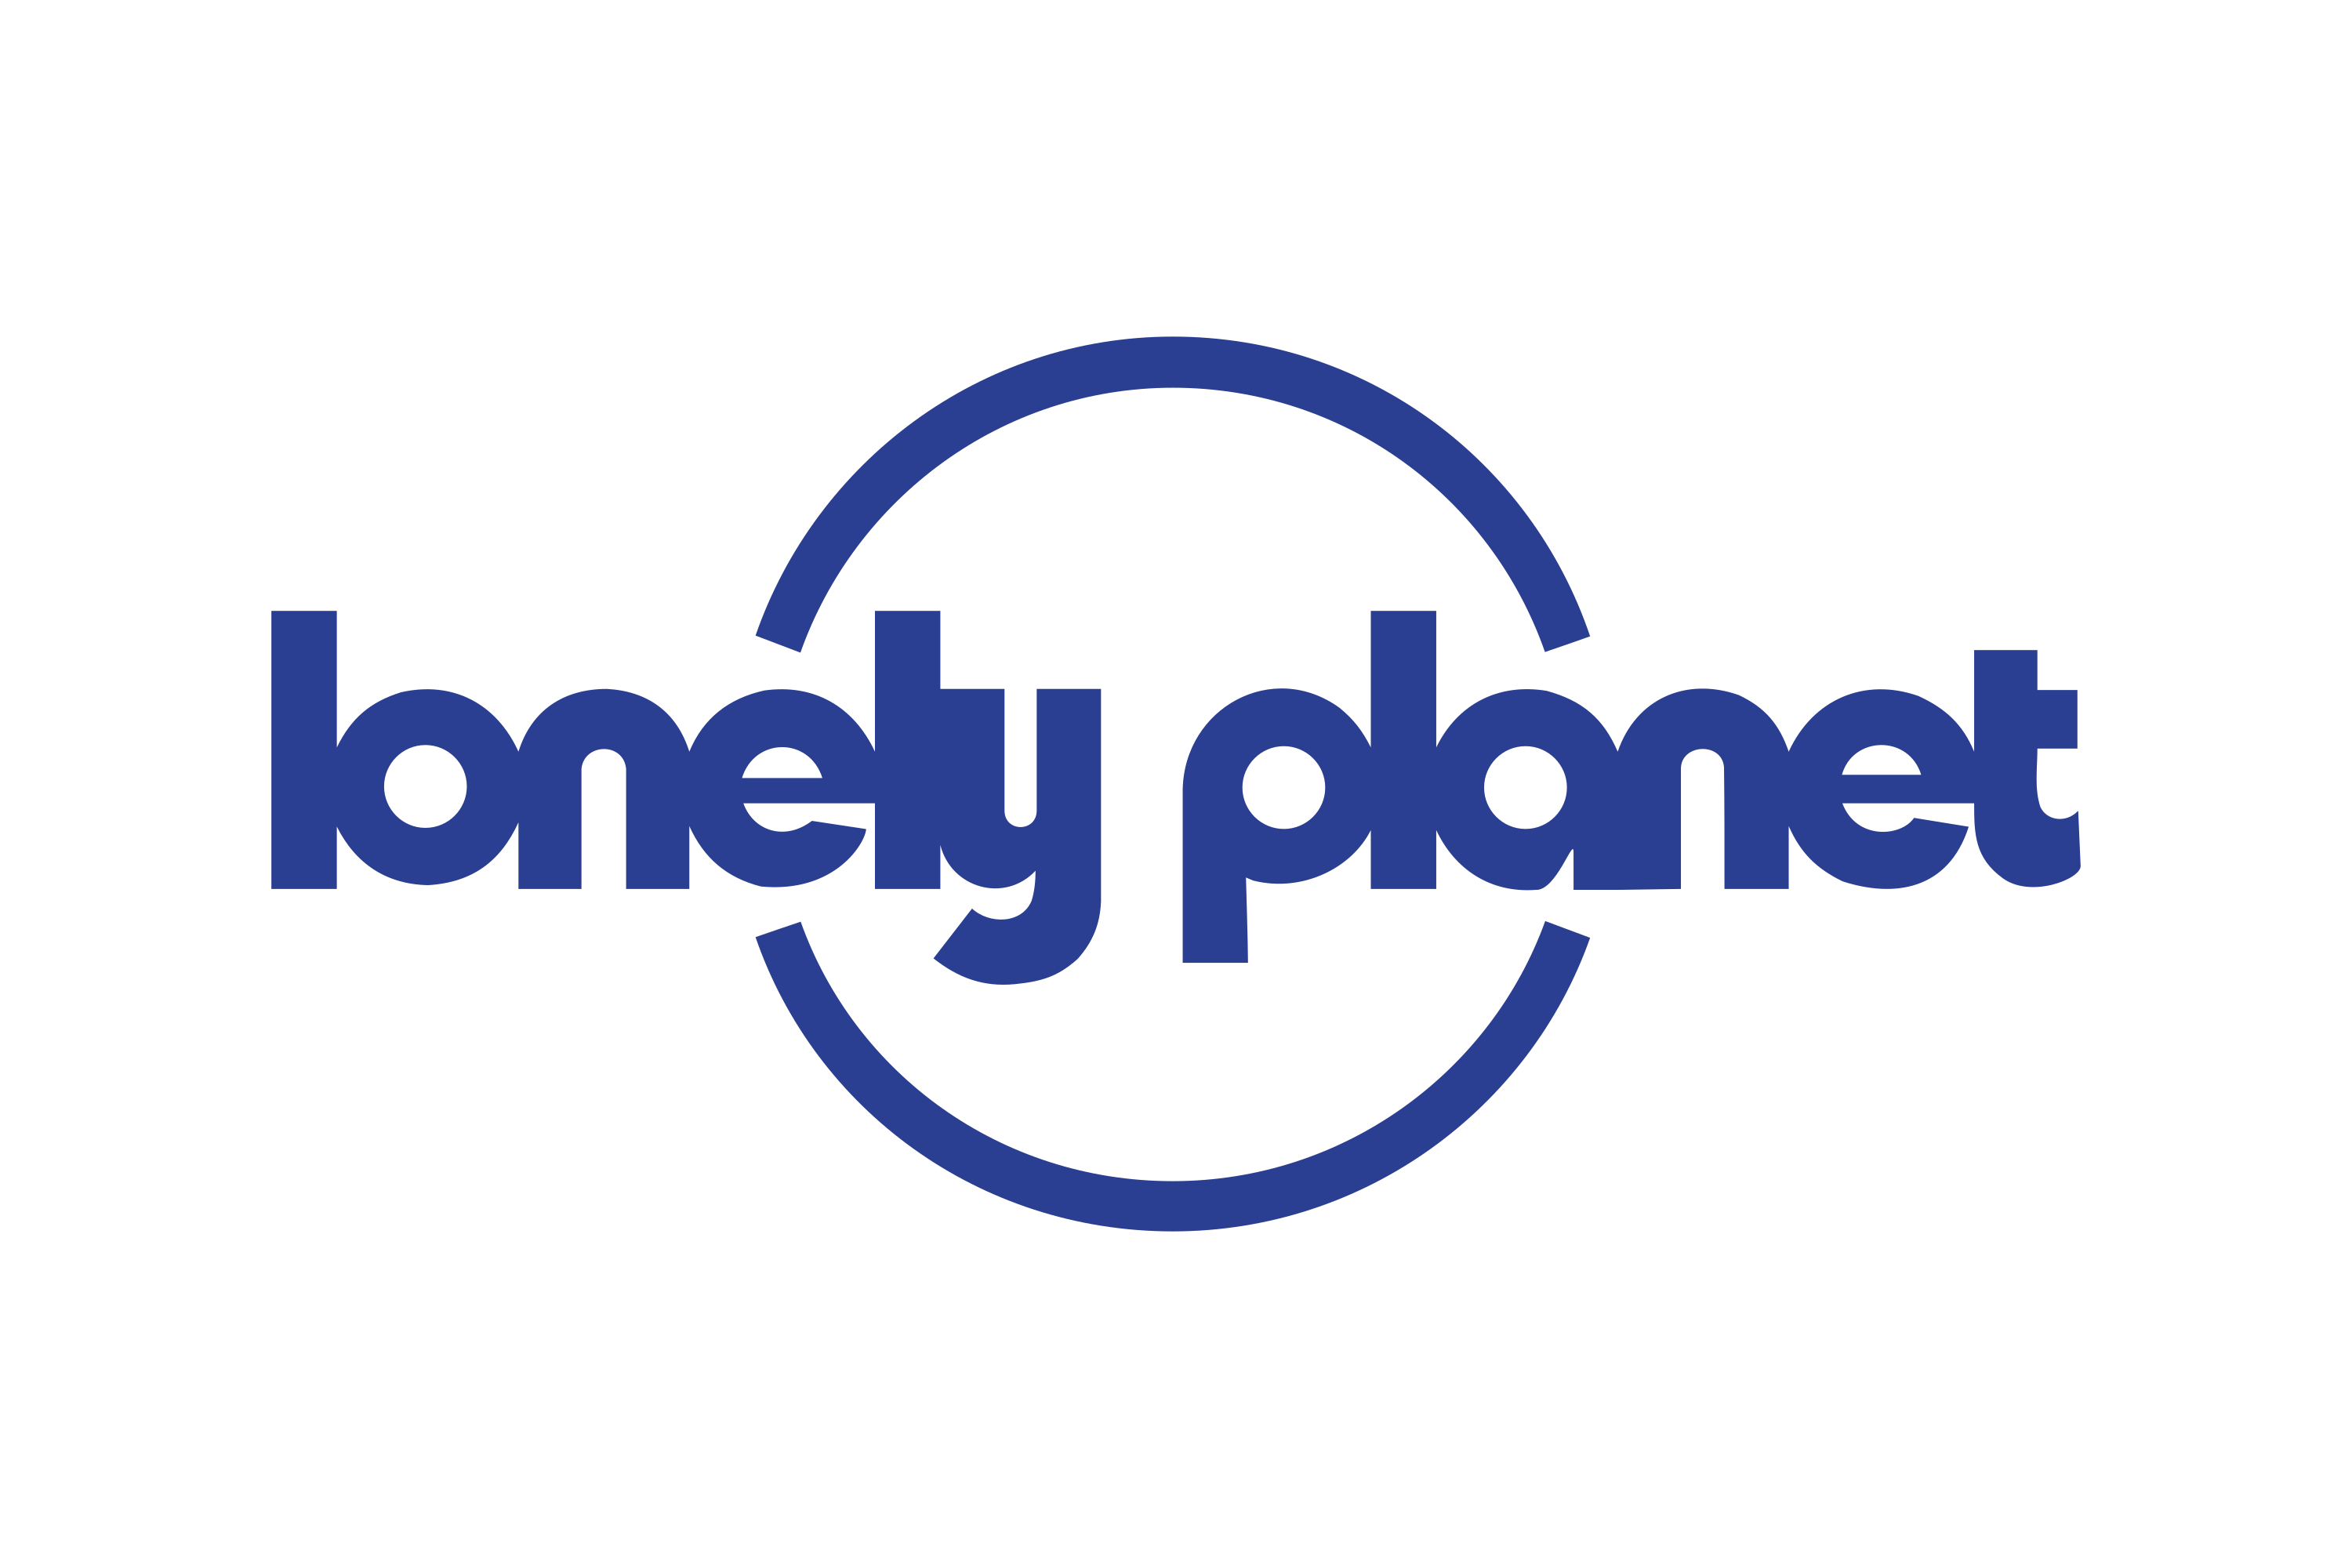 Download Lonely Planet Logo In Svg Vector Or Png File Format Logo Wine